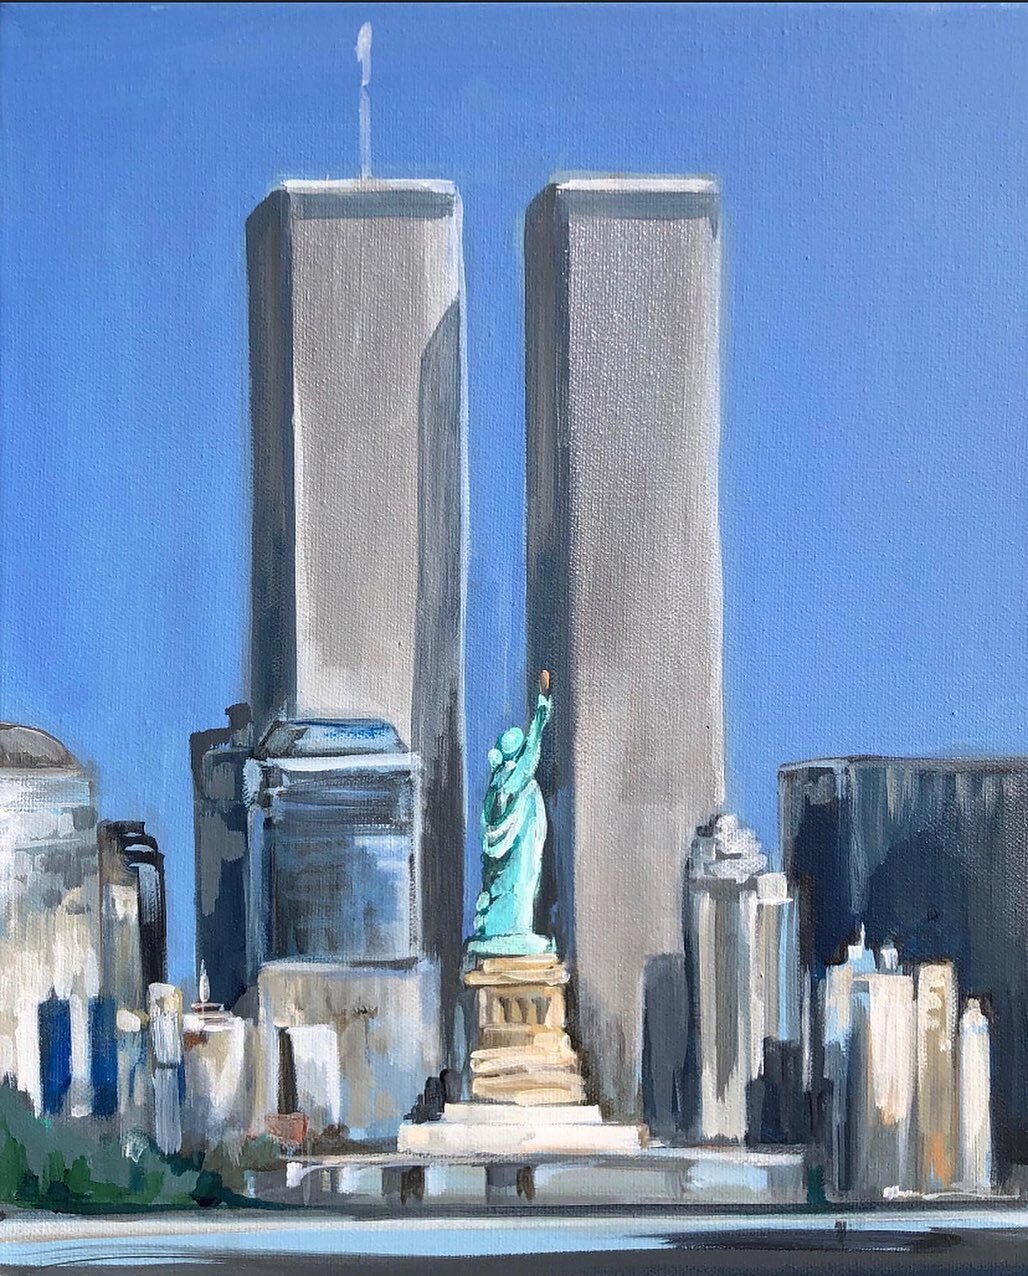 9.11.2001 // NEVER FORGET 

&ldquo;If we learn nothing else from this tragedy, we learn that life is short and there is no time for hate&rdquo; - wife of Flight 93 pilot 

20 years ago today&hellip; Hug your loved ones a little tighter today, as we r